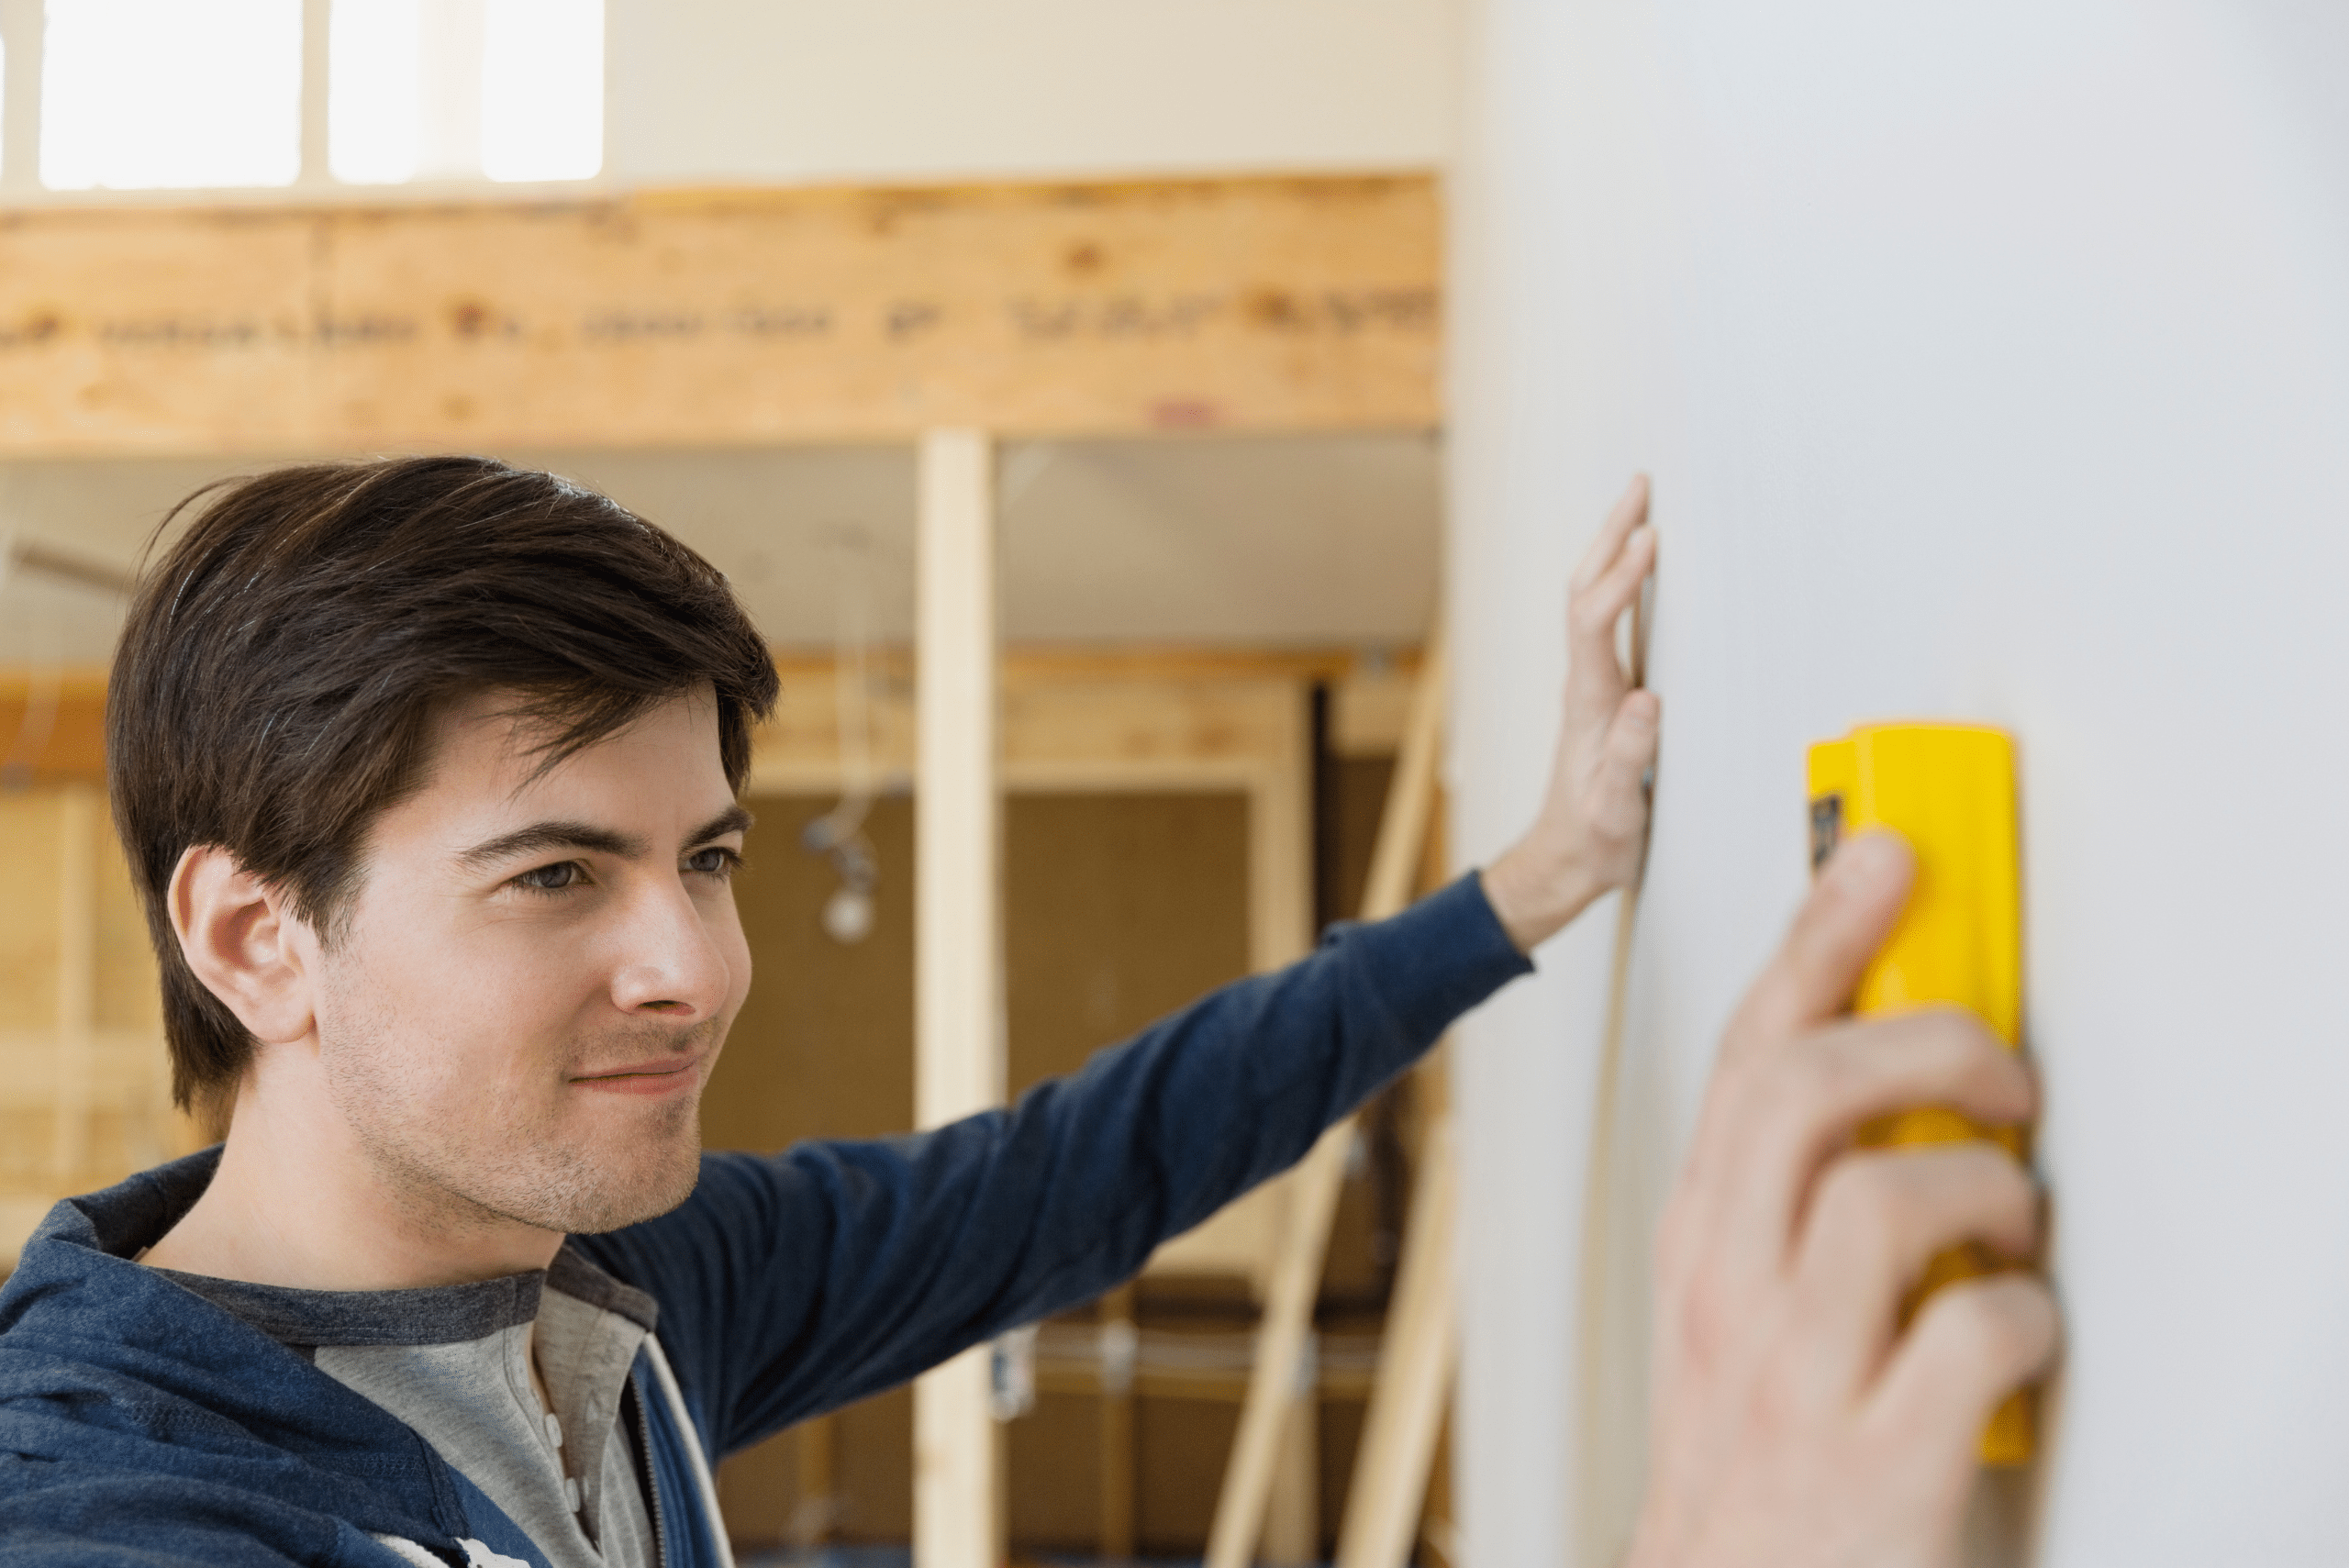 Man using a yellow stud finder on wall while placing other hand on wall.